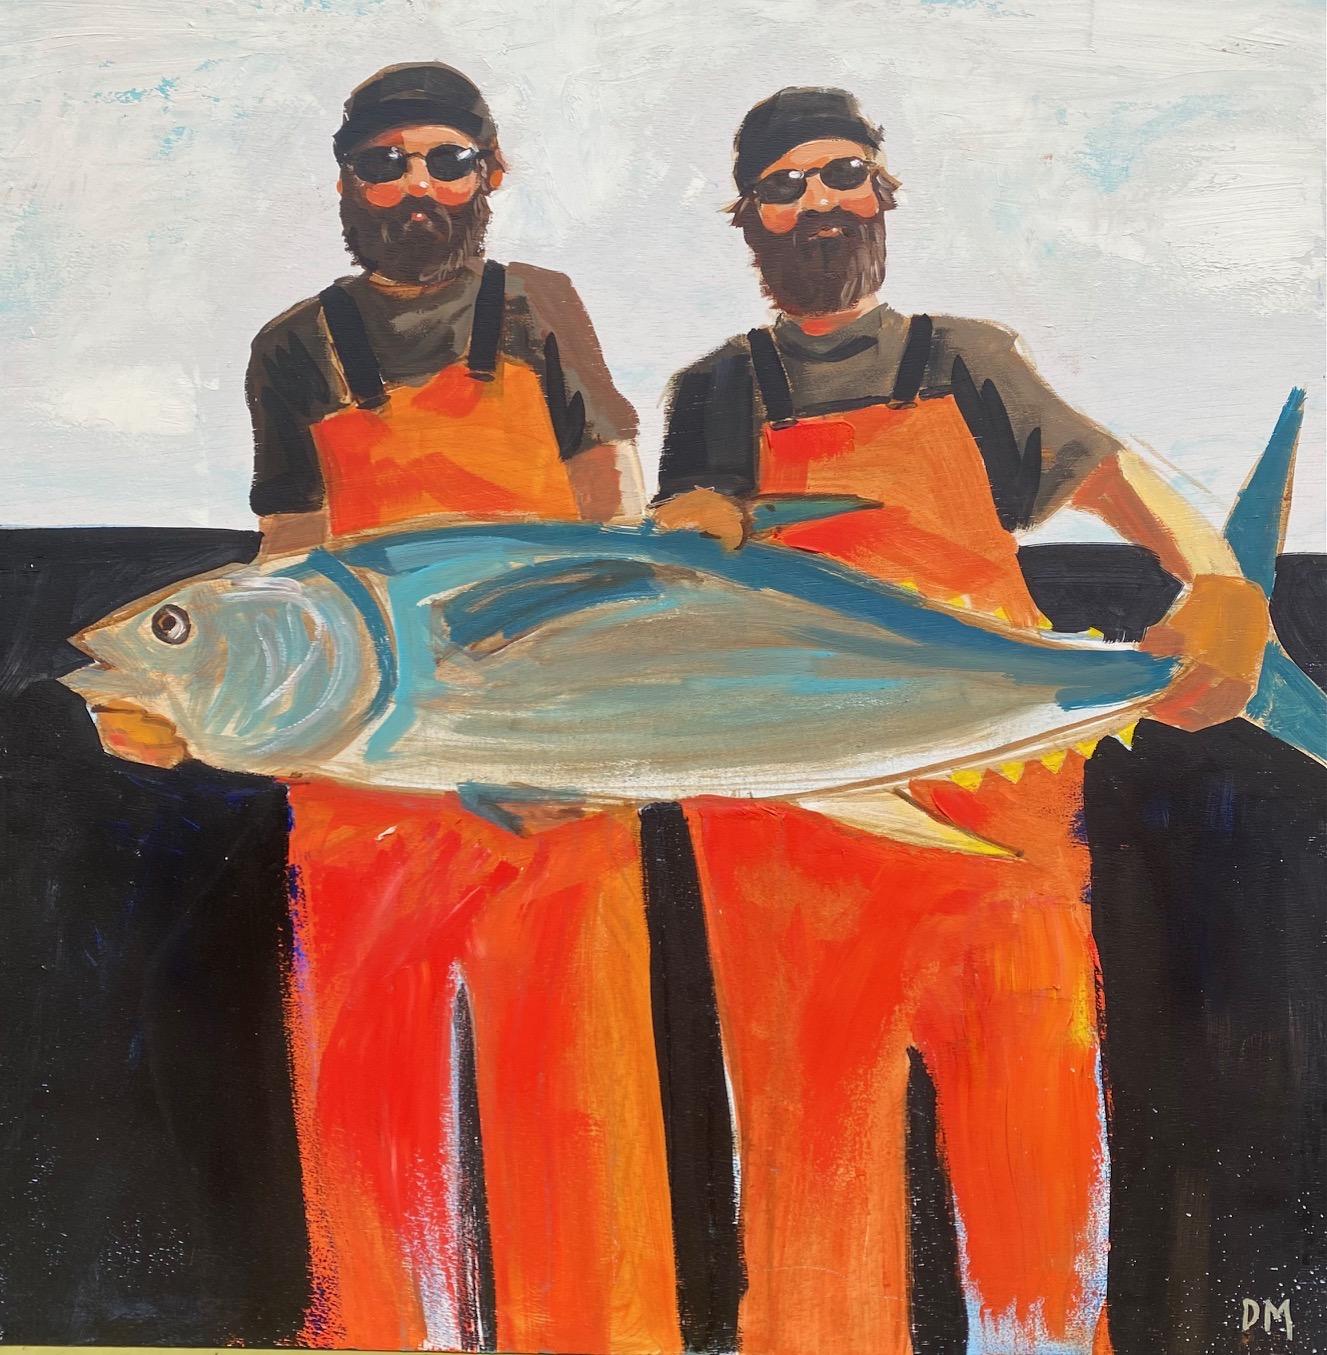 Debbie Miller Figurative Painting - "It Takes Two" a figurative oil on panel painting with two fisherman suited up